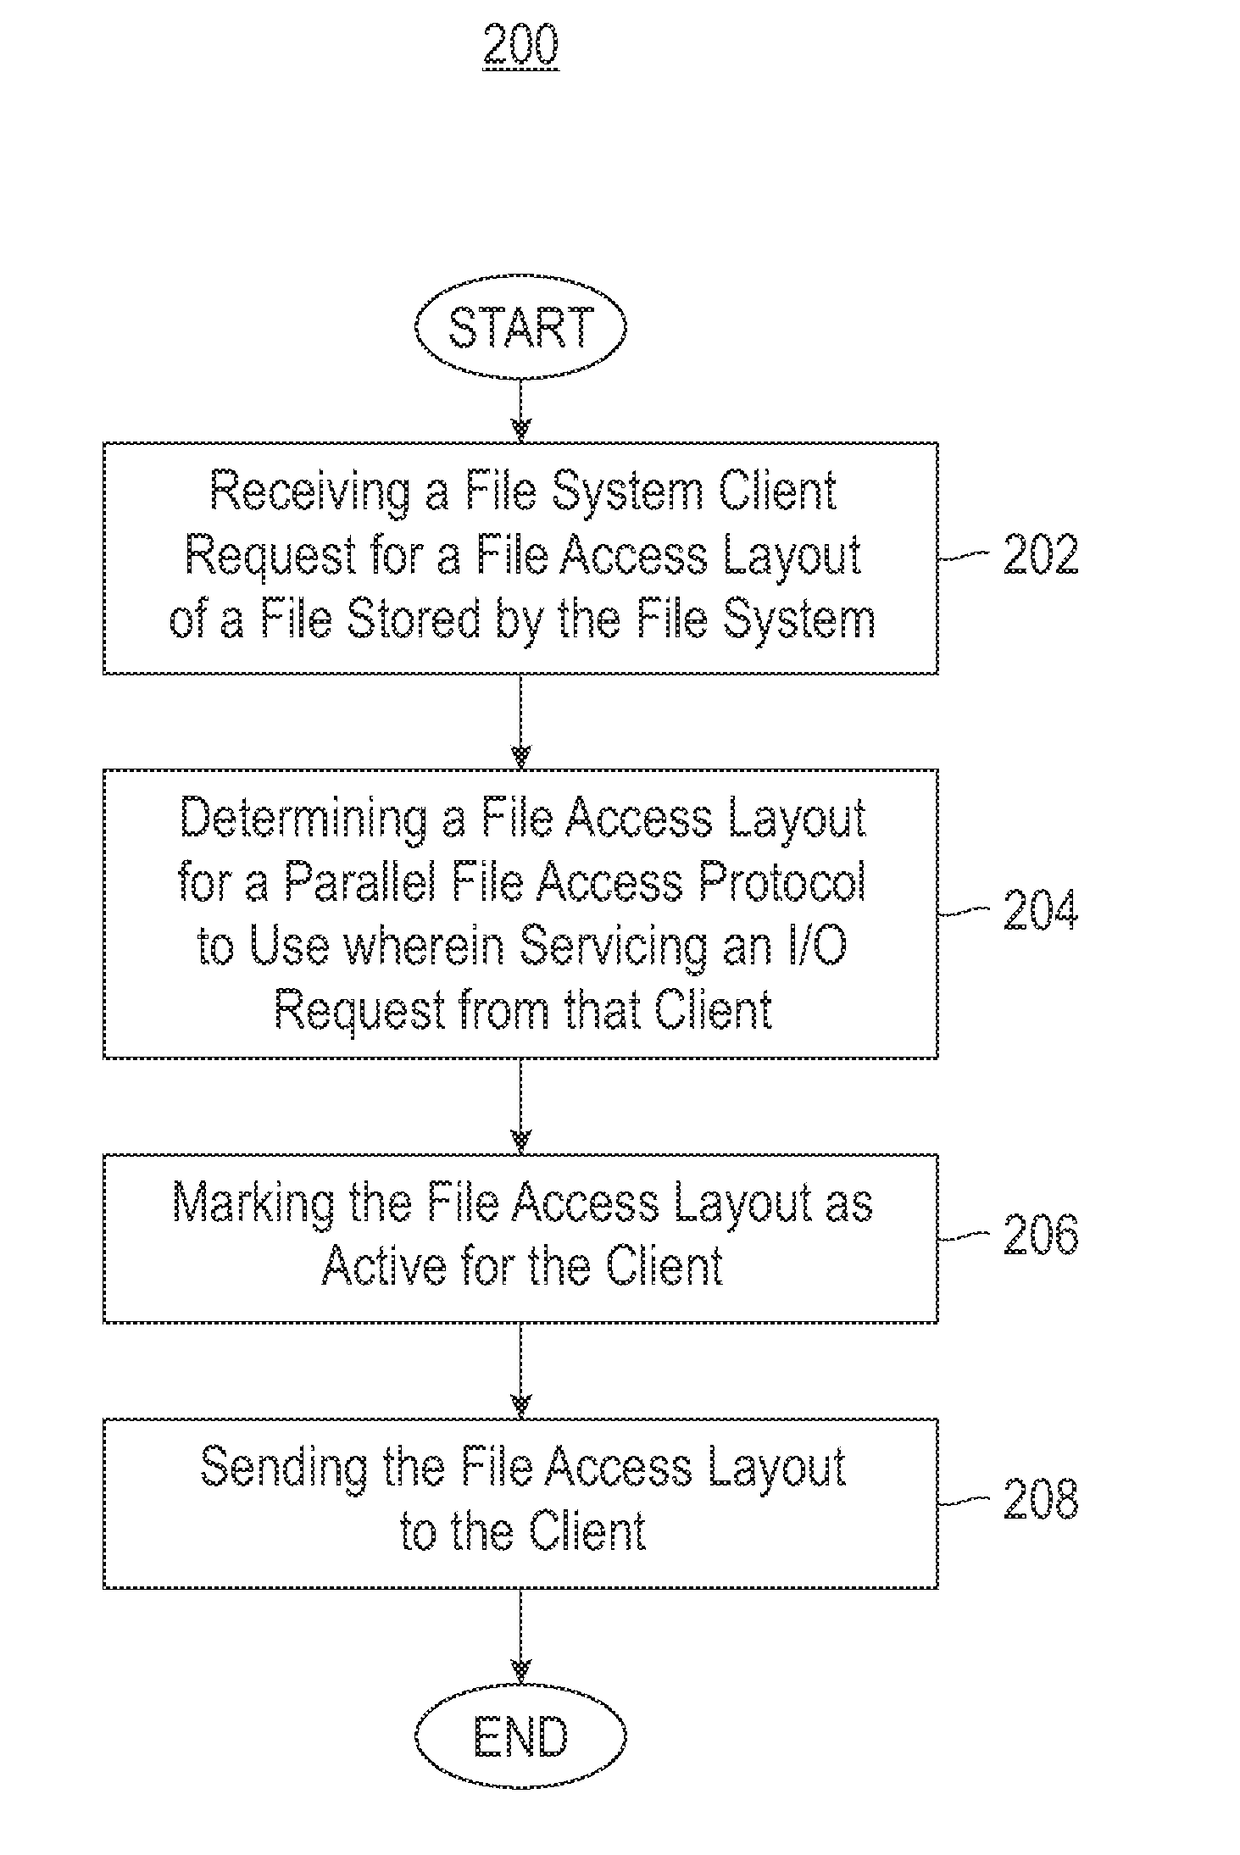 Coordinated access to a file system's shared storage using dynamic creation of file access layout